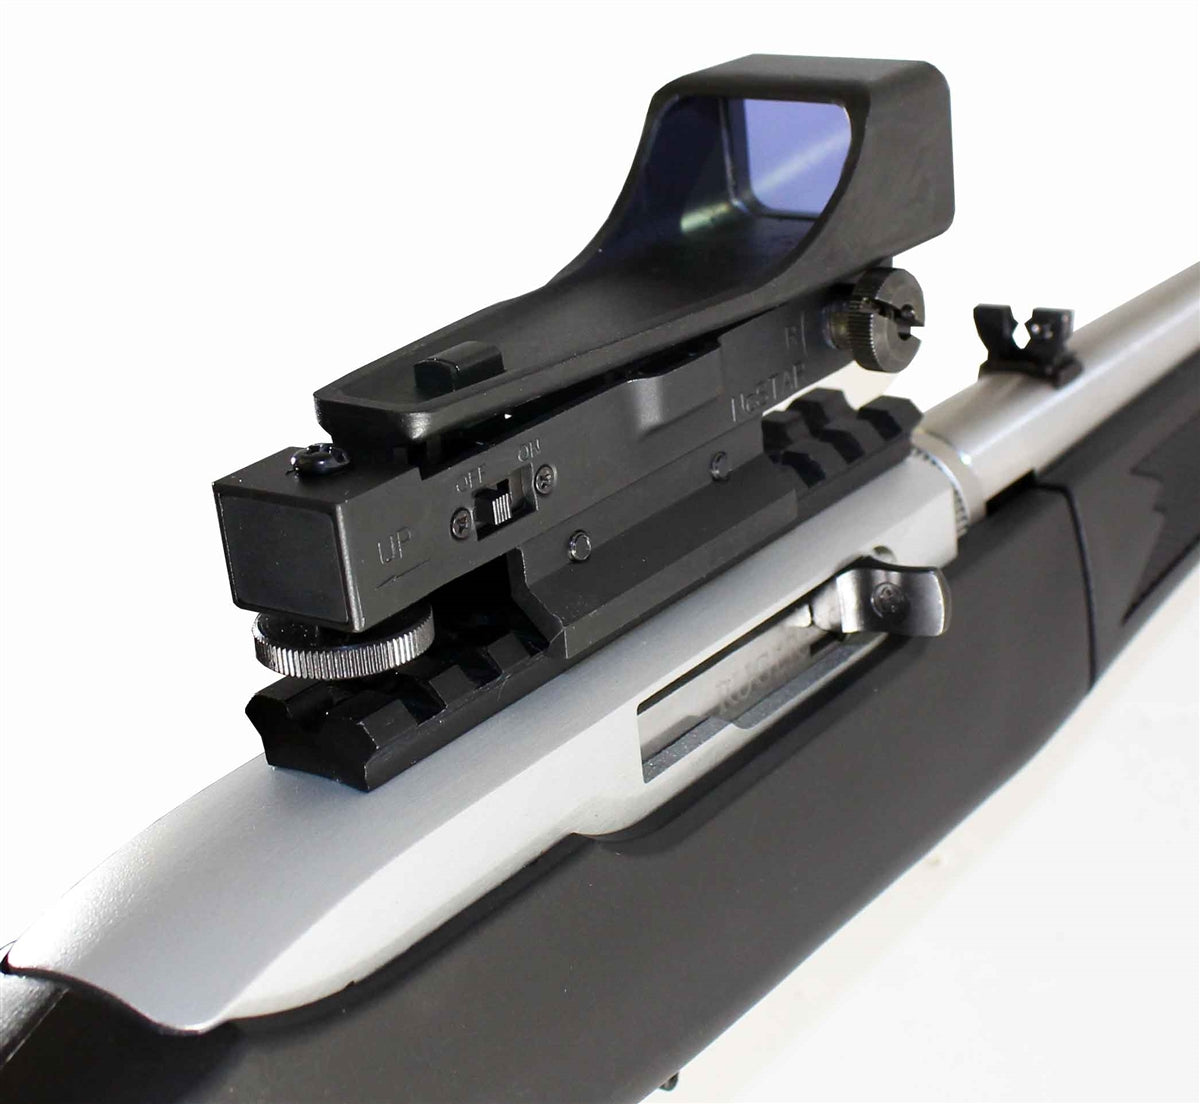 Tactical Red Dot Reflex Sight Aluminum Black With Base Mount For Ruger 10/22 Model Rifle.